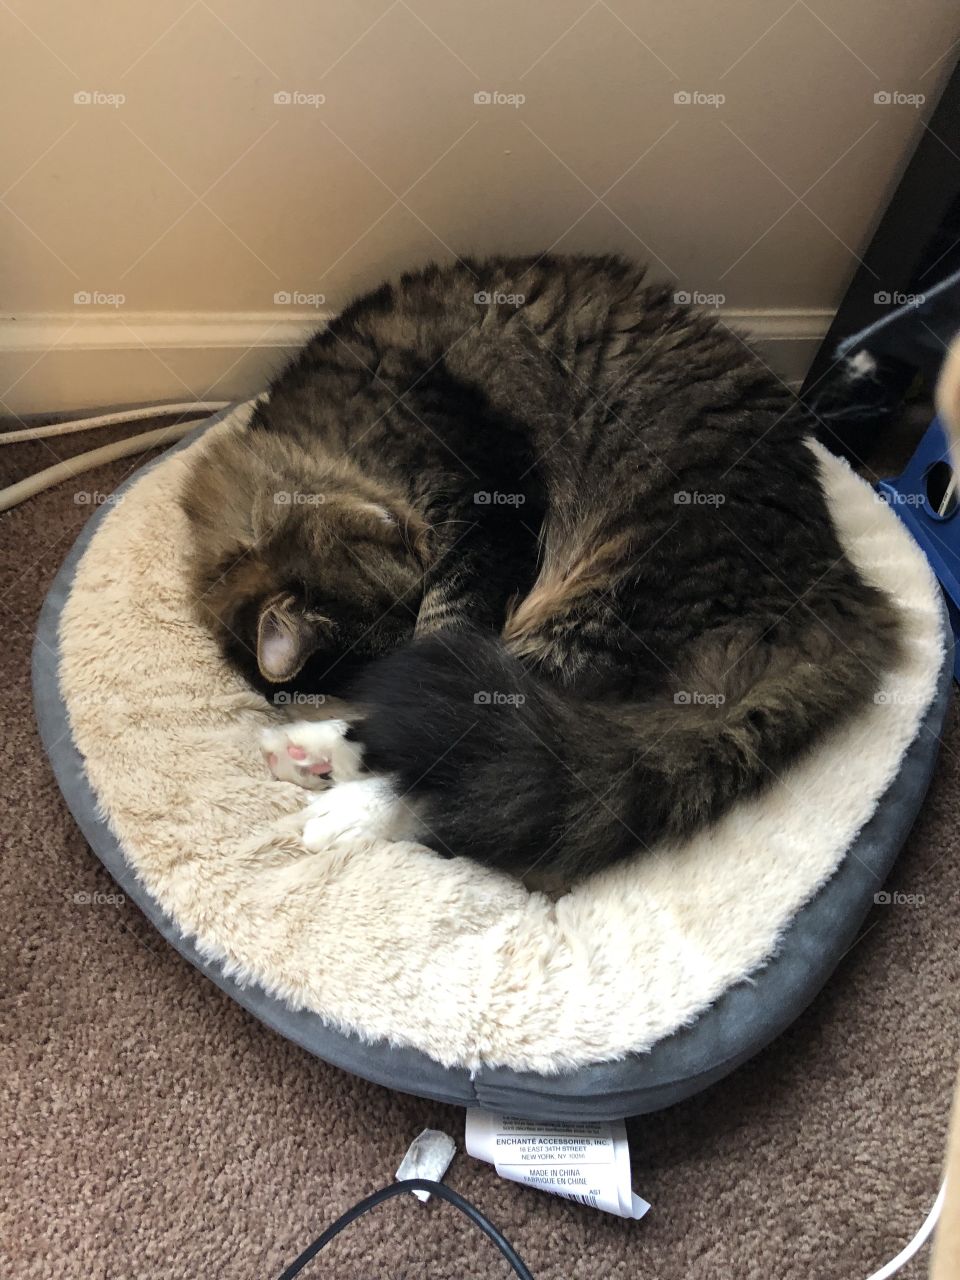 Sleepy time in the new bed